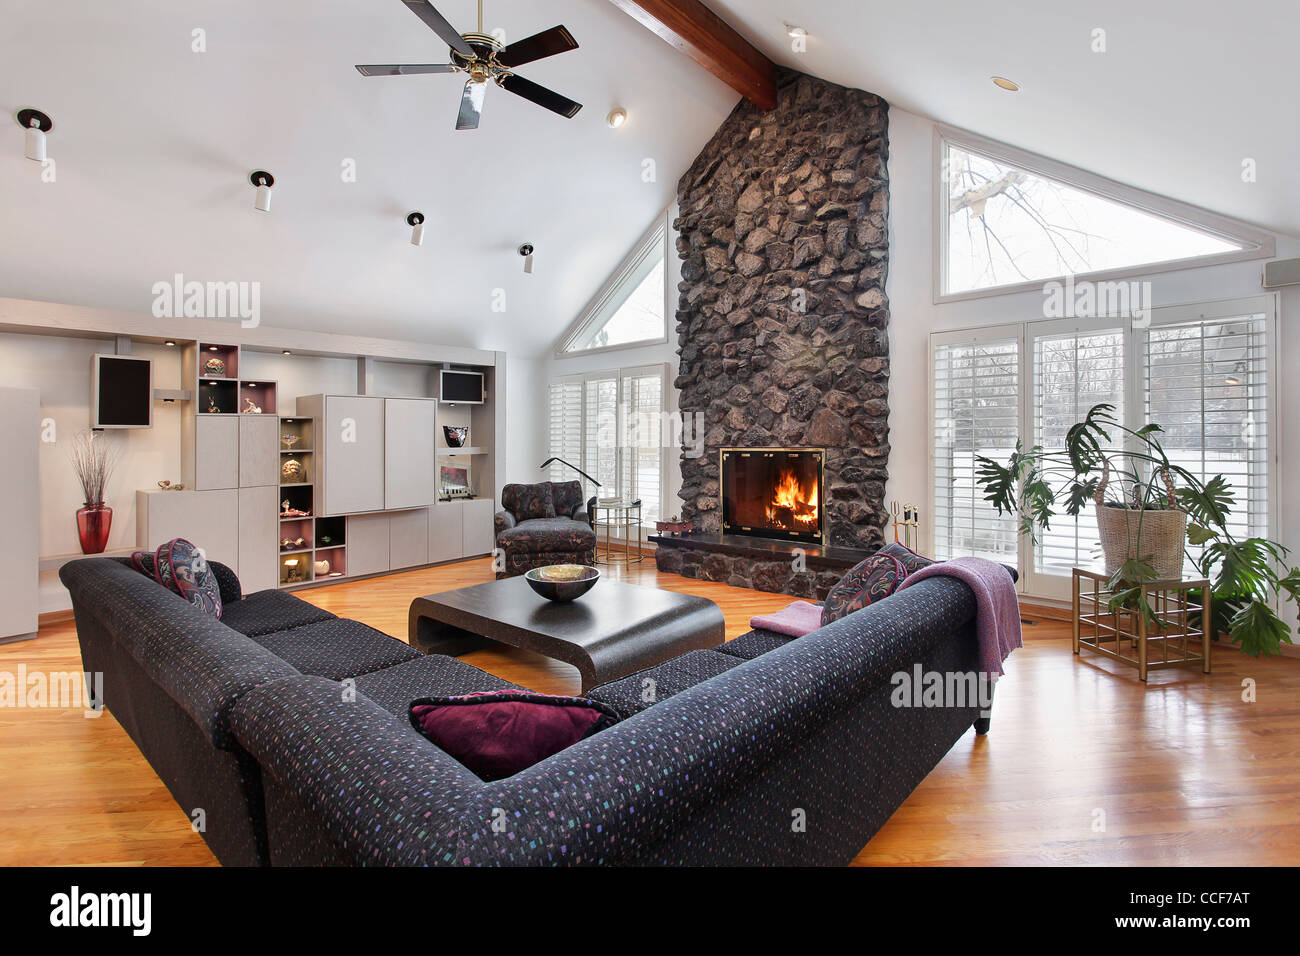 Family room with two story stone fireplace and wood beams Stock Photo